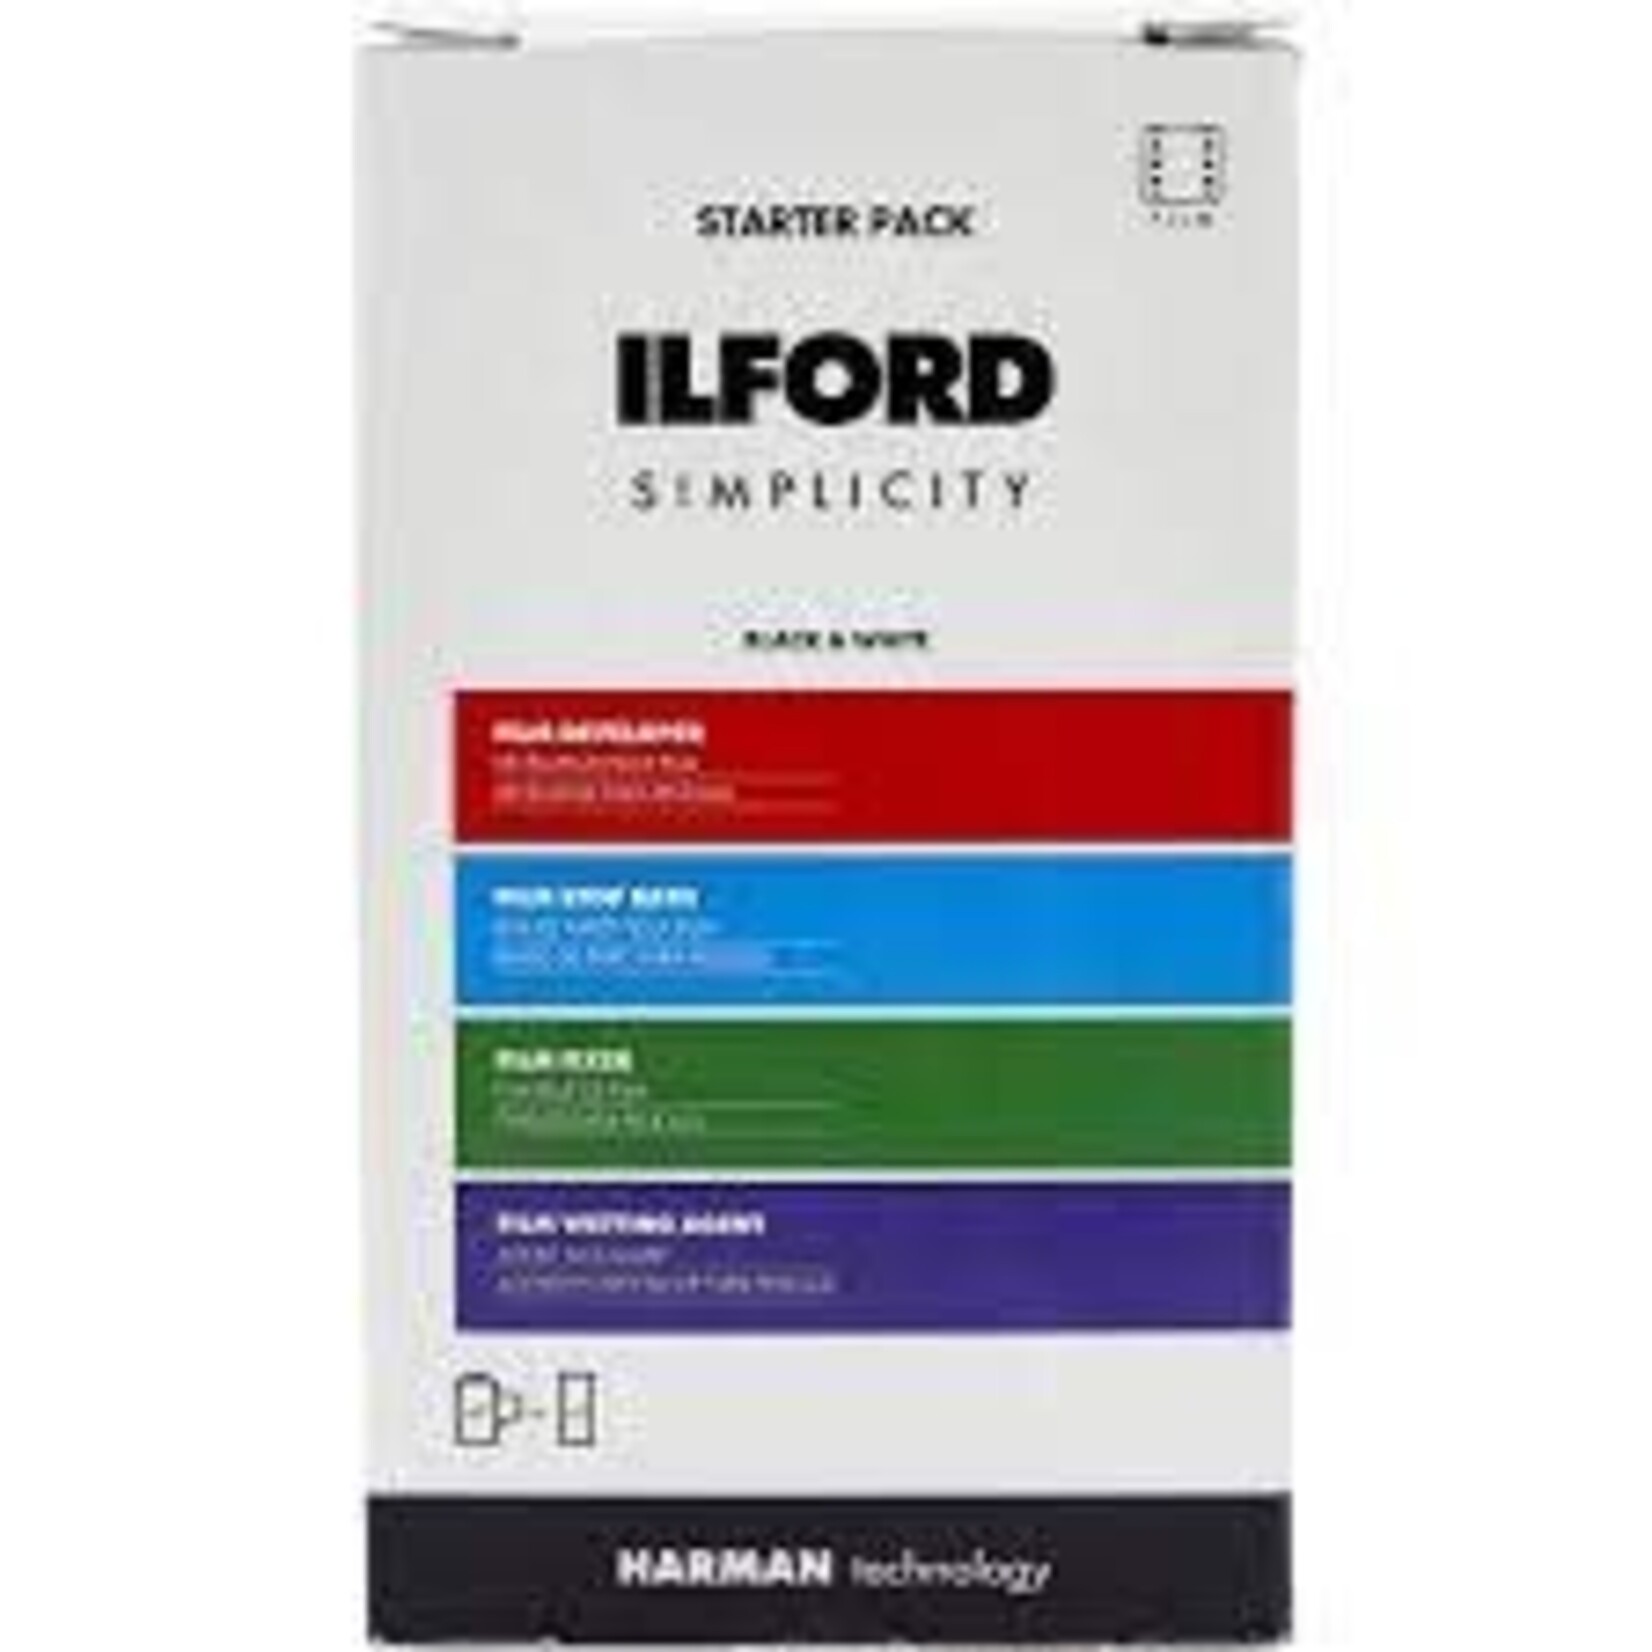 Ilford Ilford Simplicity Starter Pack B&W Film Chemical